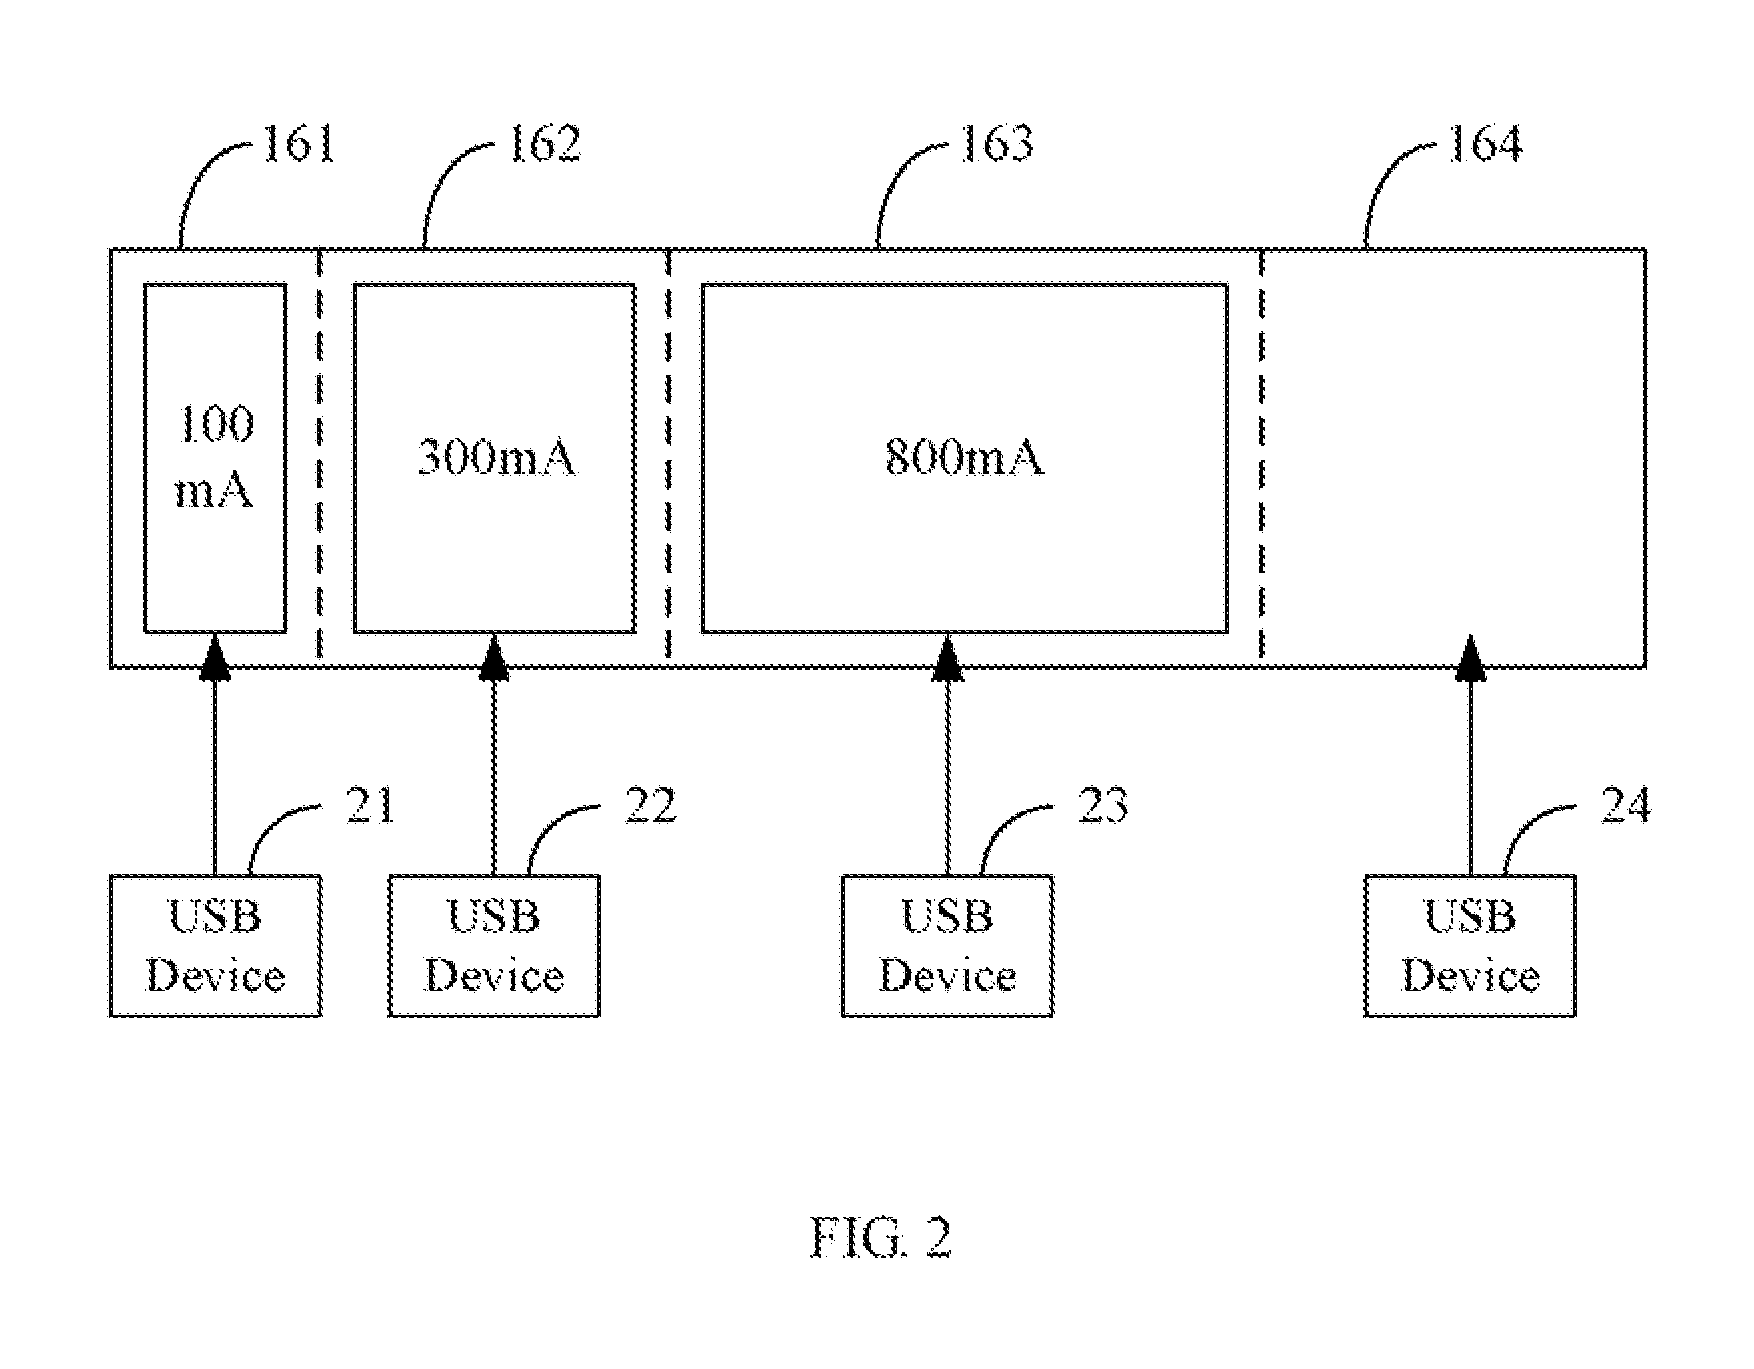 Electronic device and method for dynamic USB power assignment